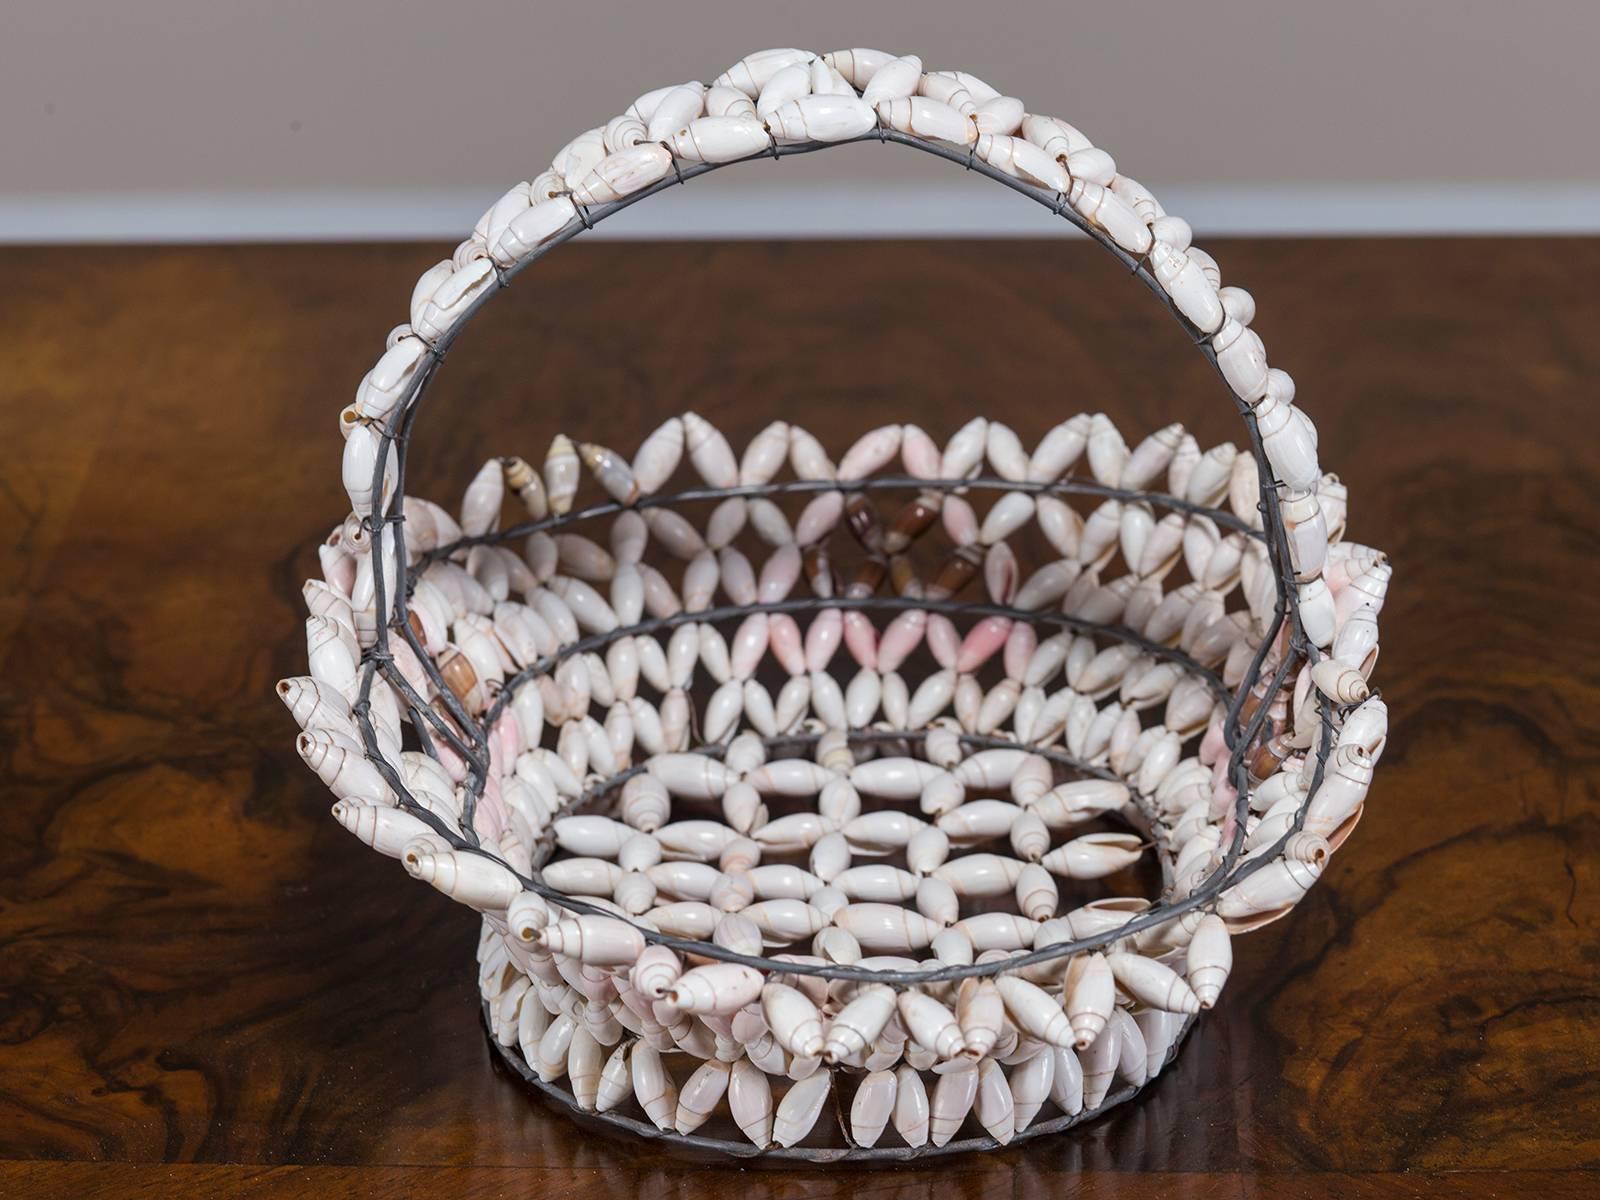 Receive our new selections direct from 1stdibs by email each week. Please click “Follow Dealer” button below and see them first!

The classic oval shape of this handmade wire basket is embellished with carefully chosen sea shells that remain in